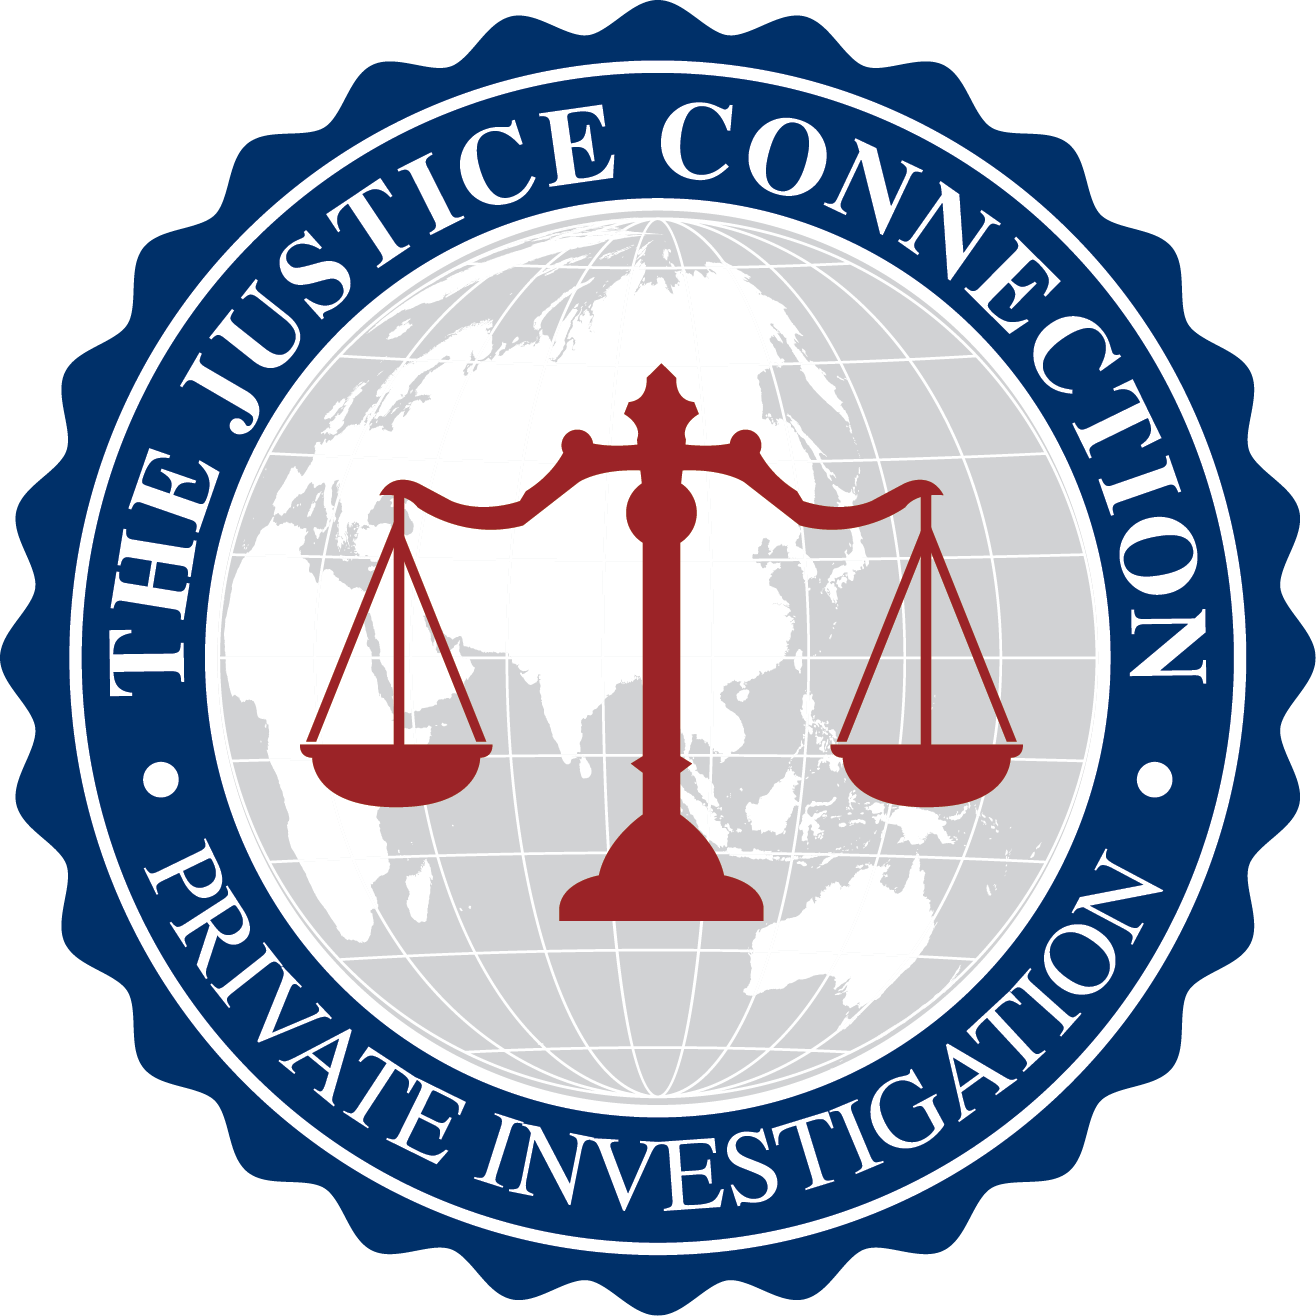 Justice clipart federal agent. About the connection private